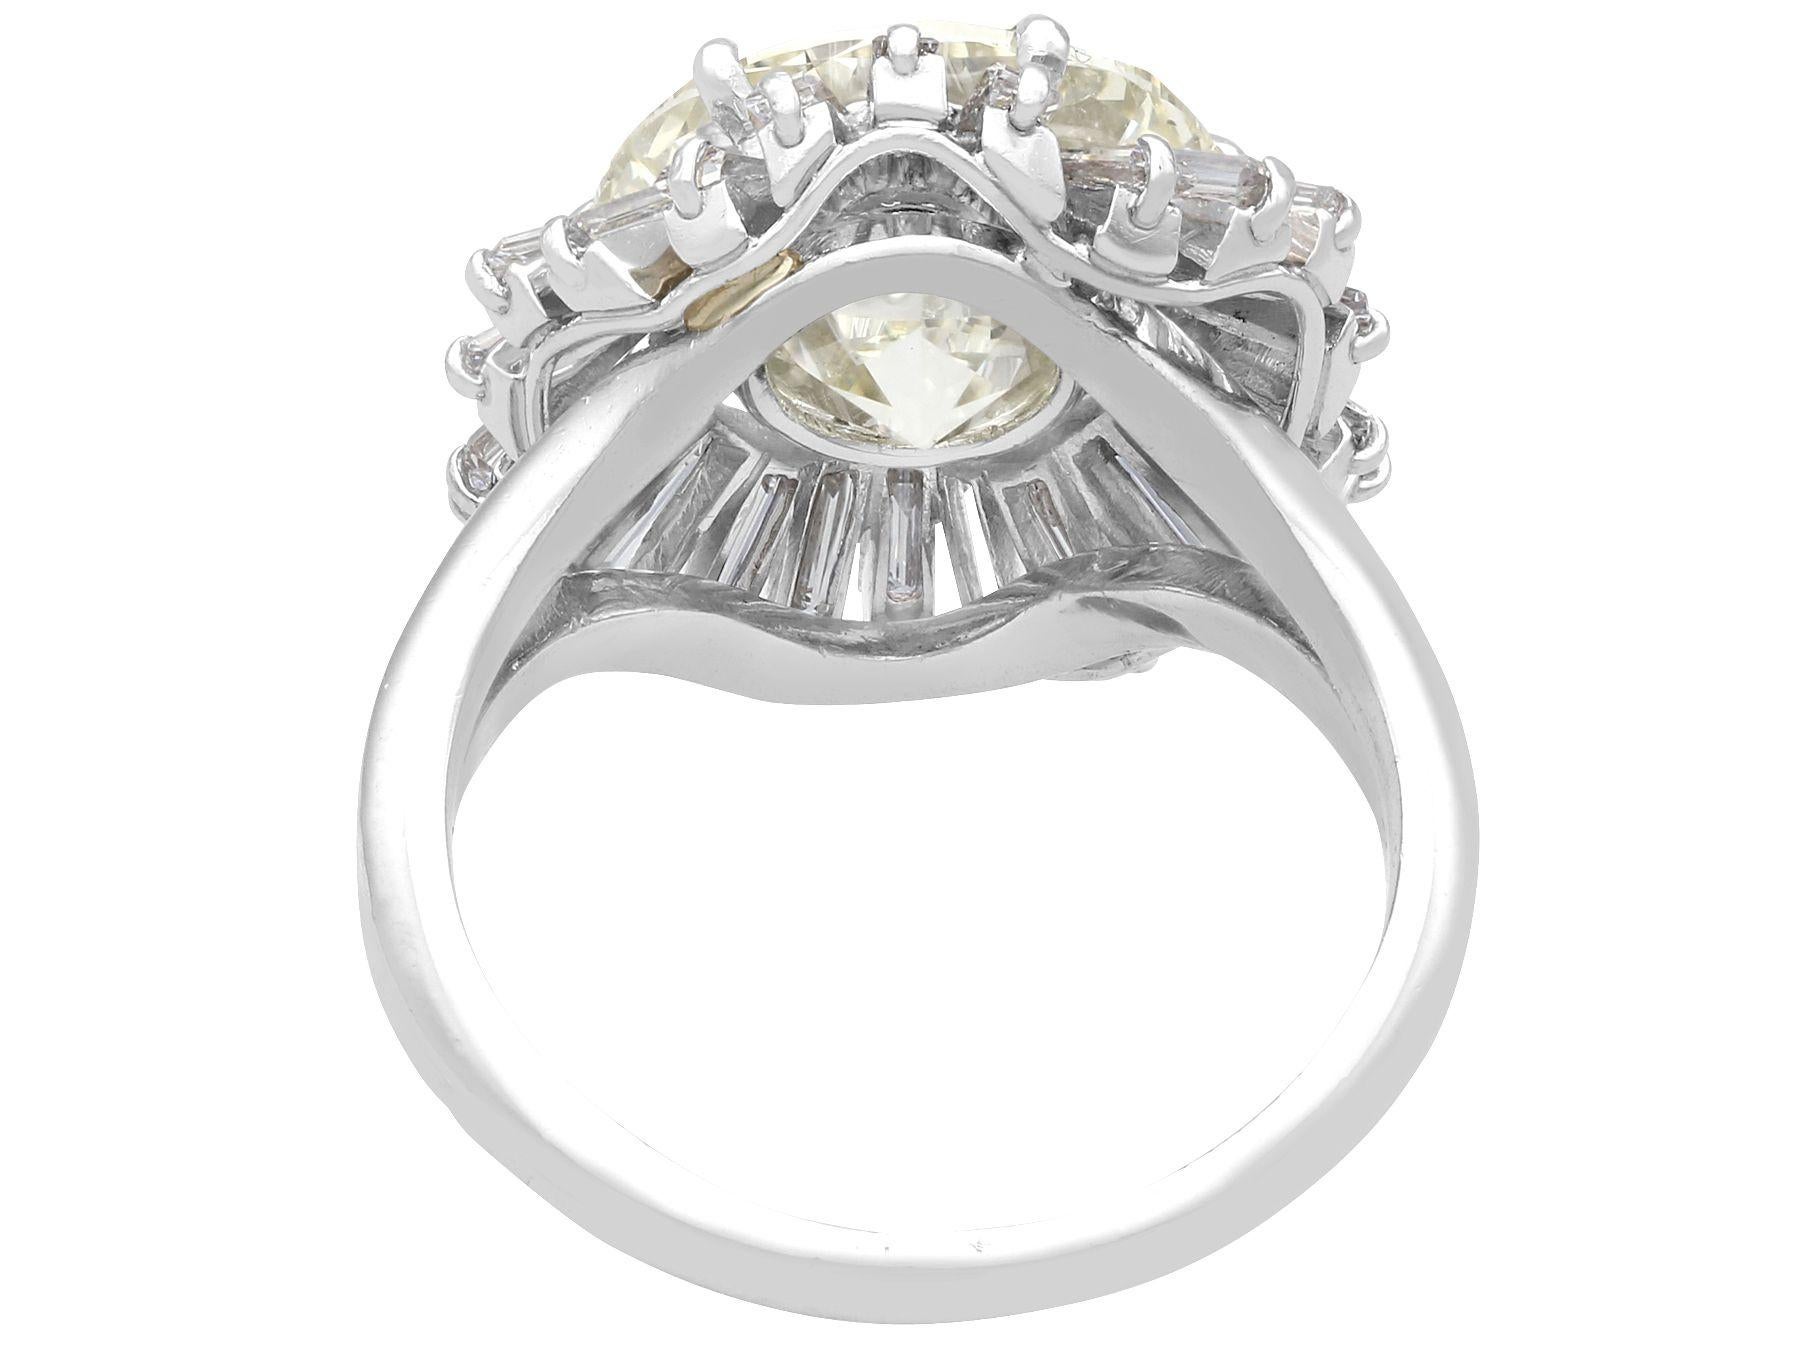 Round Cut Vintage 8.24 Carat Diamond and Platinum Ring by Boucheron For Sale